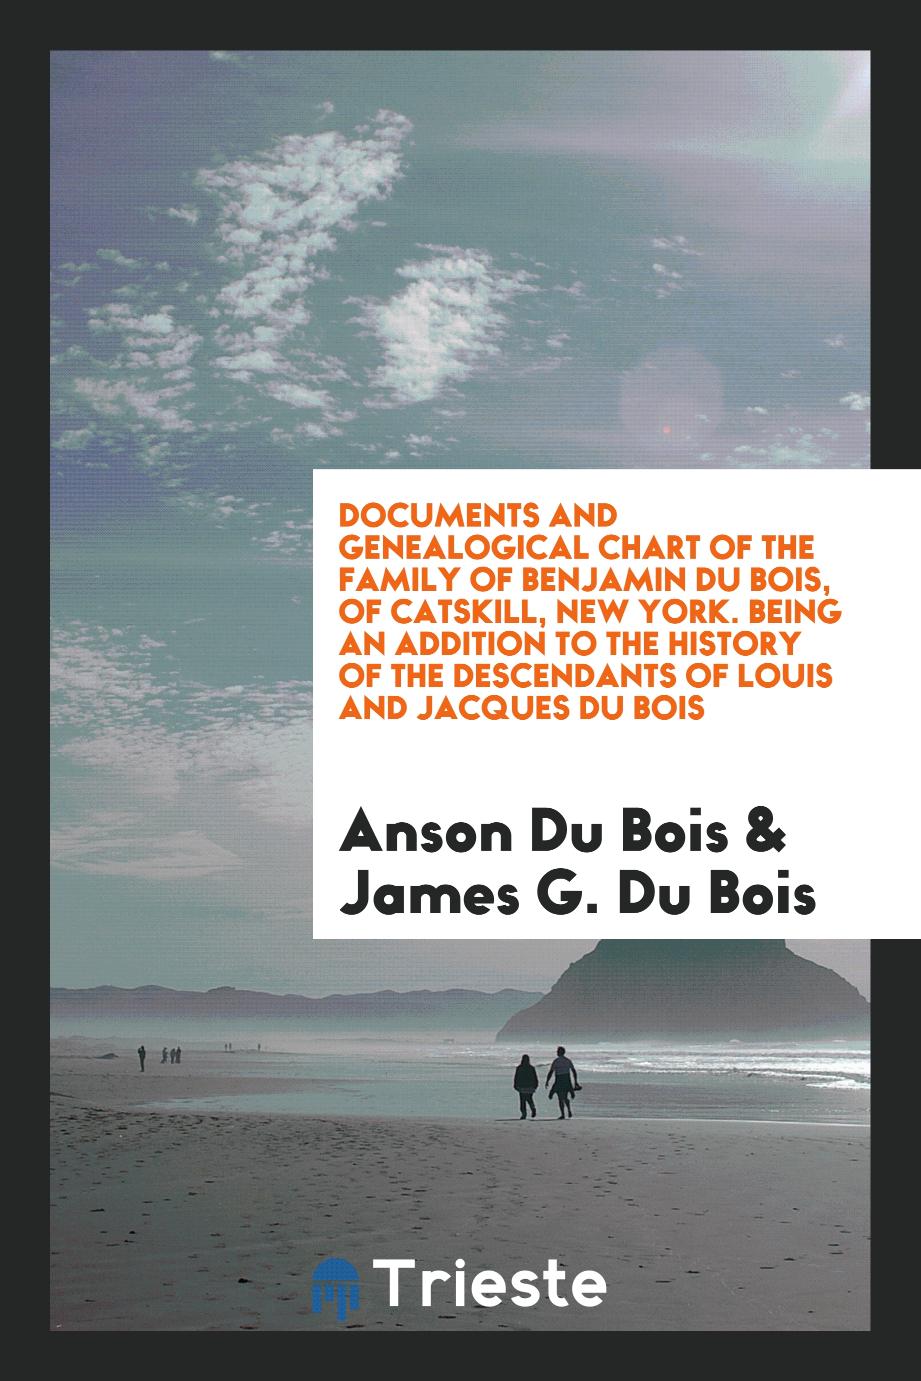 Anson Du Bois, James G. Du Bois - Documents and Genealogical Chart of the Family of Benjamin Du Bois, of Catskill, New York. Being an Addition to the History of the Descendants of Louis and Jacques Du Bois